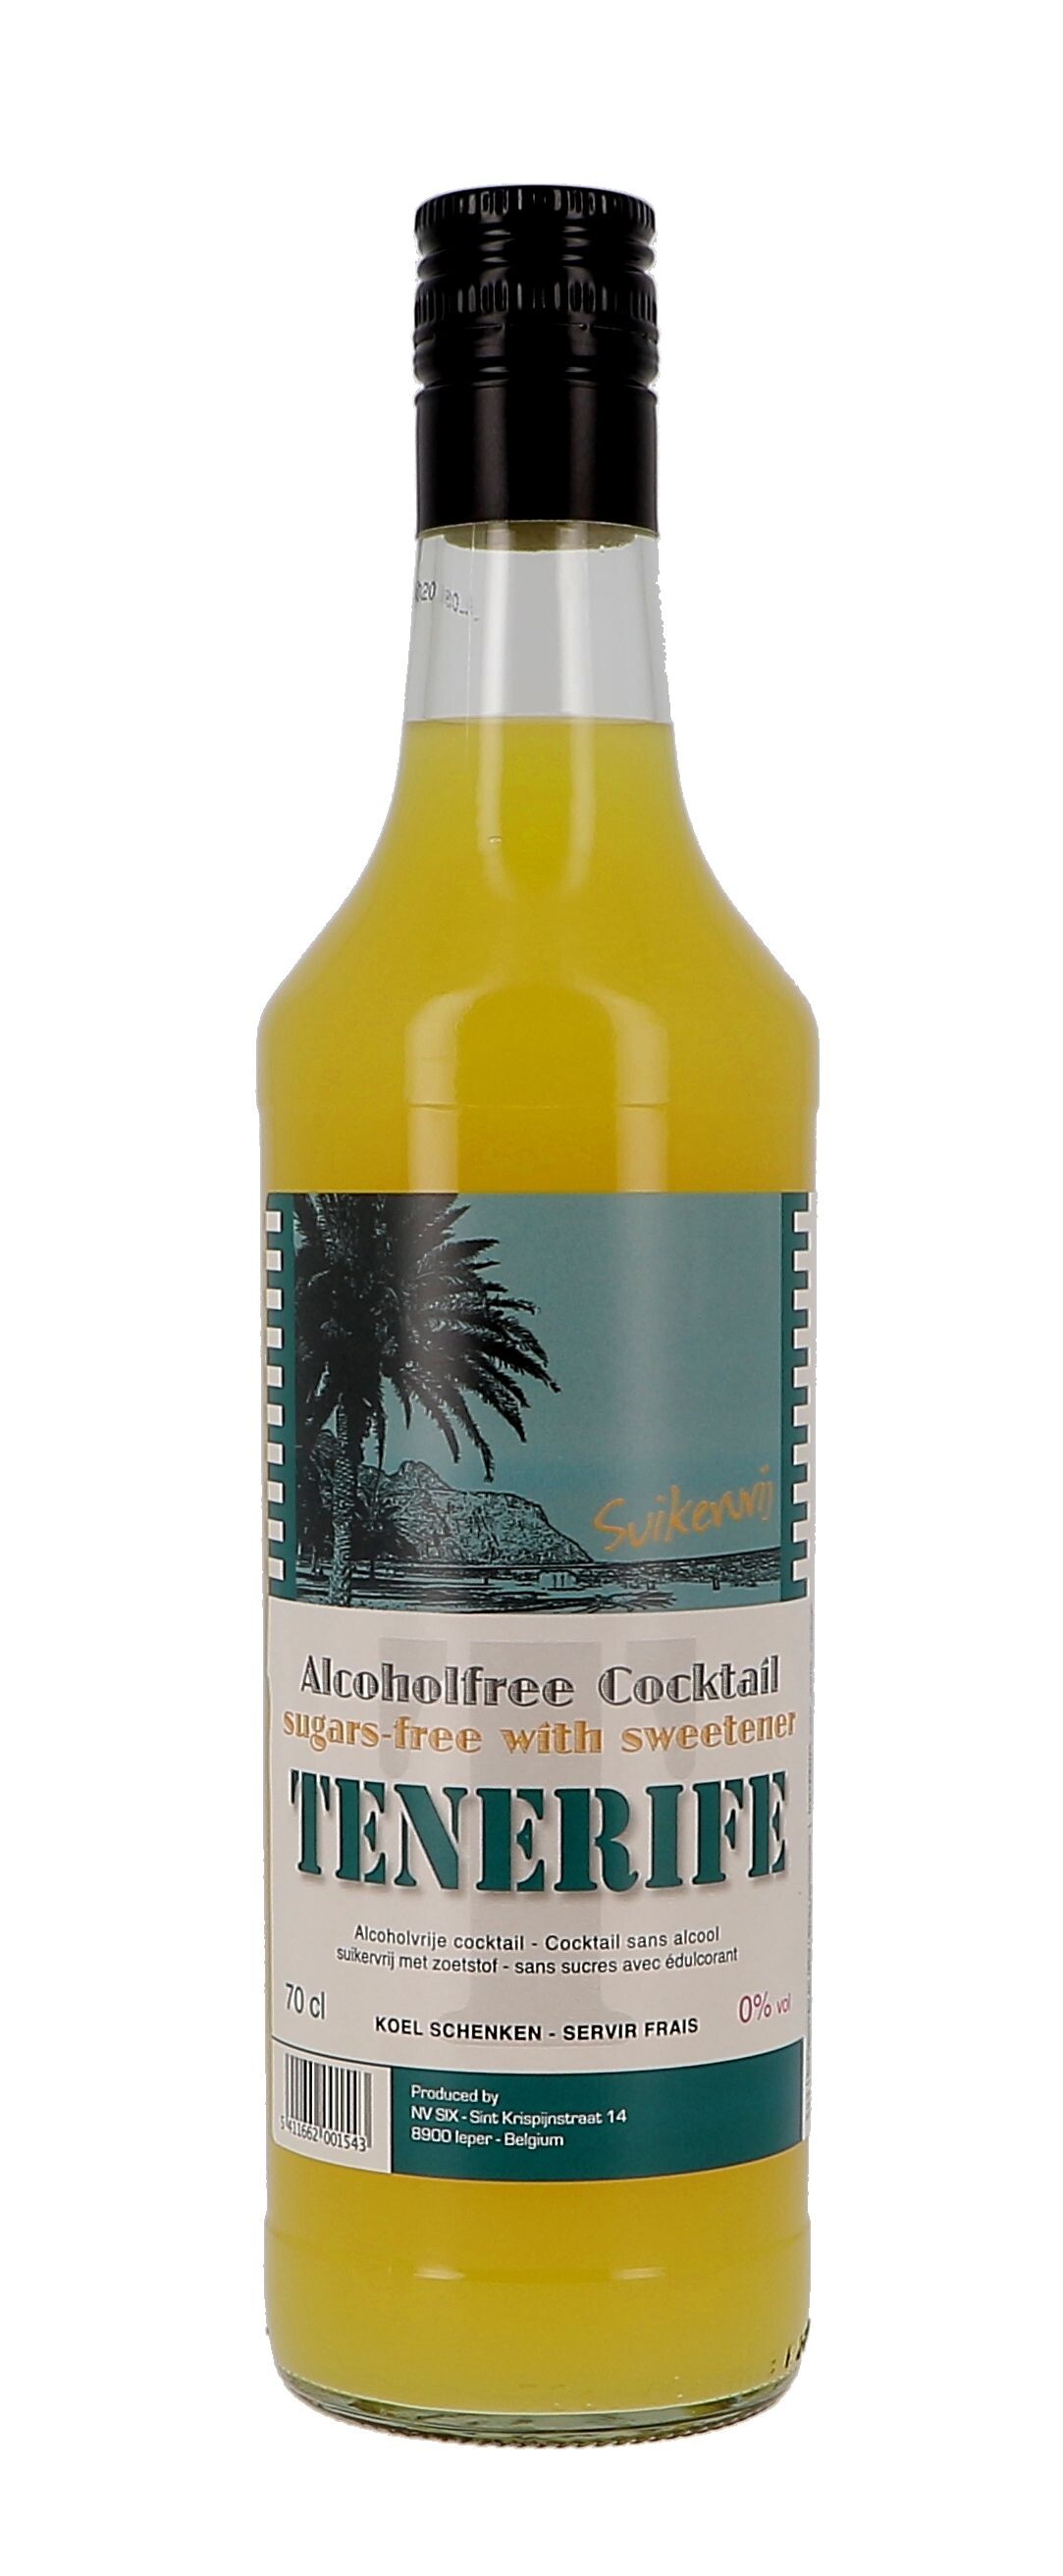 Cocktail Tenerife 70cl 0% non alcoholic Cocktail